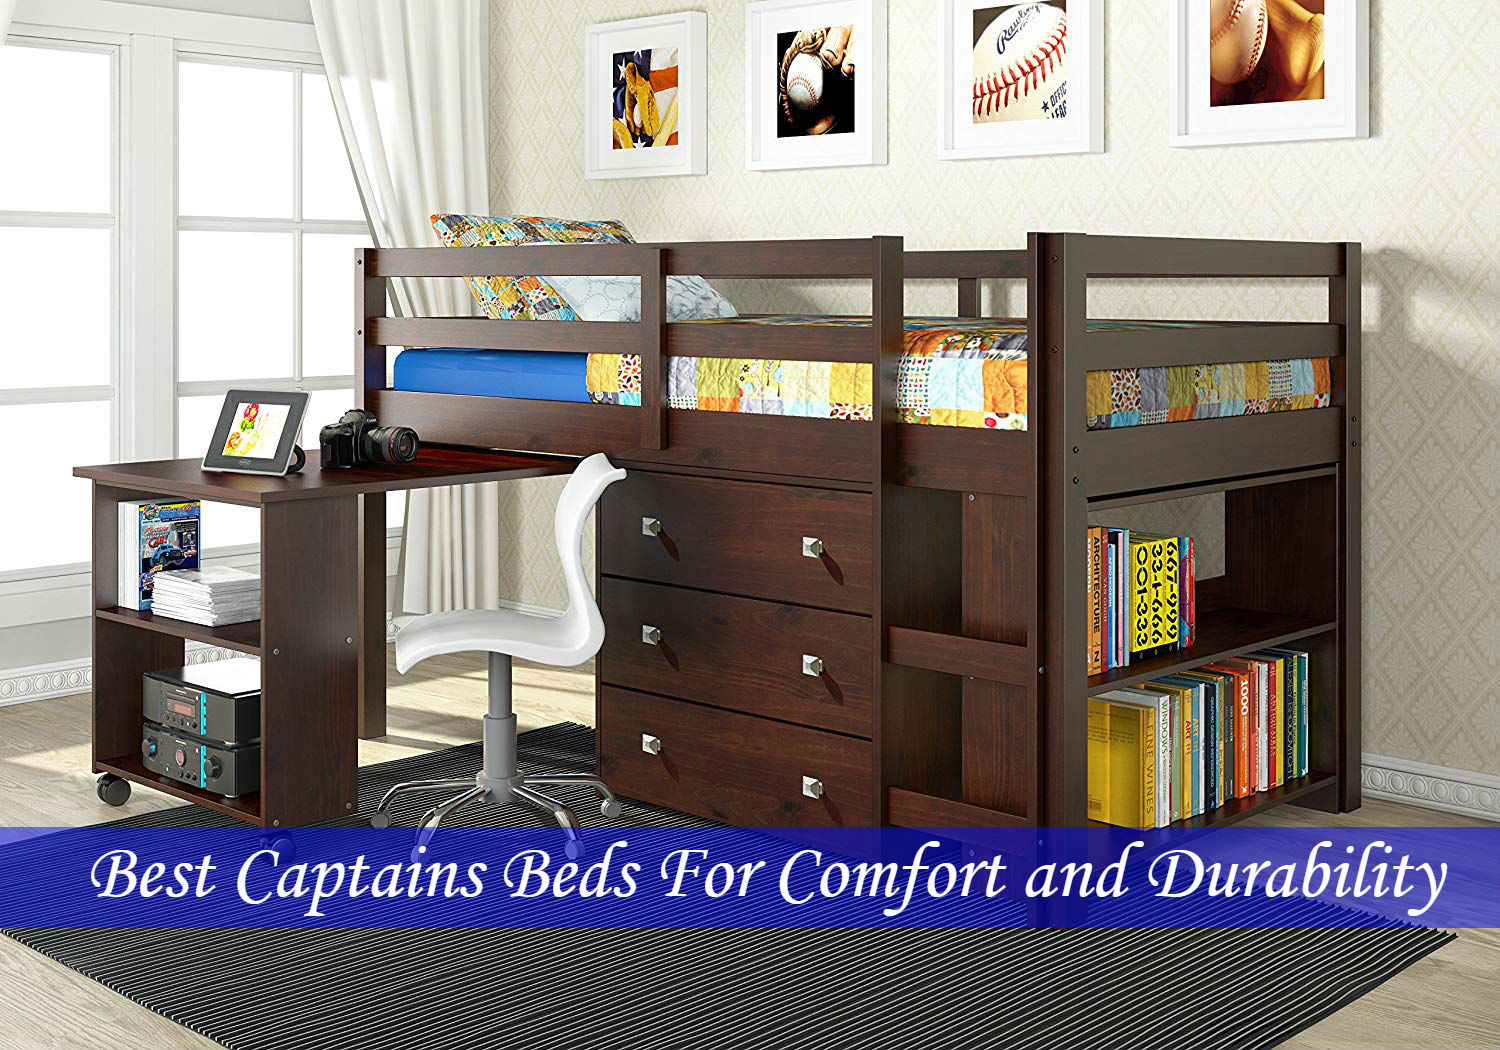 Captain bed is still a great choice for style and storage